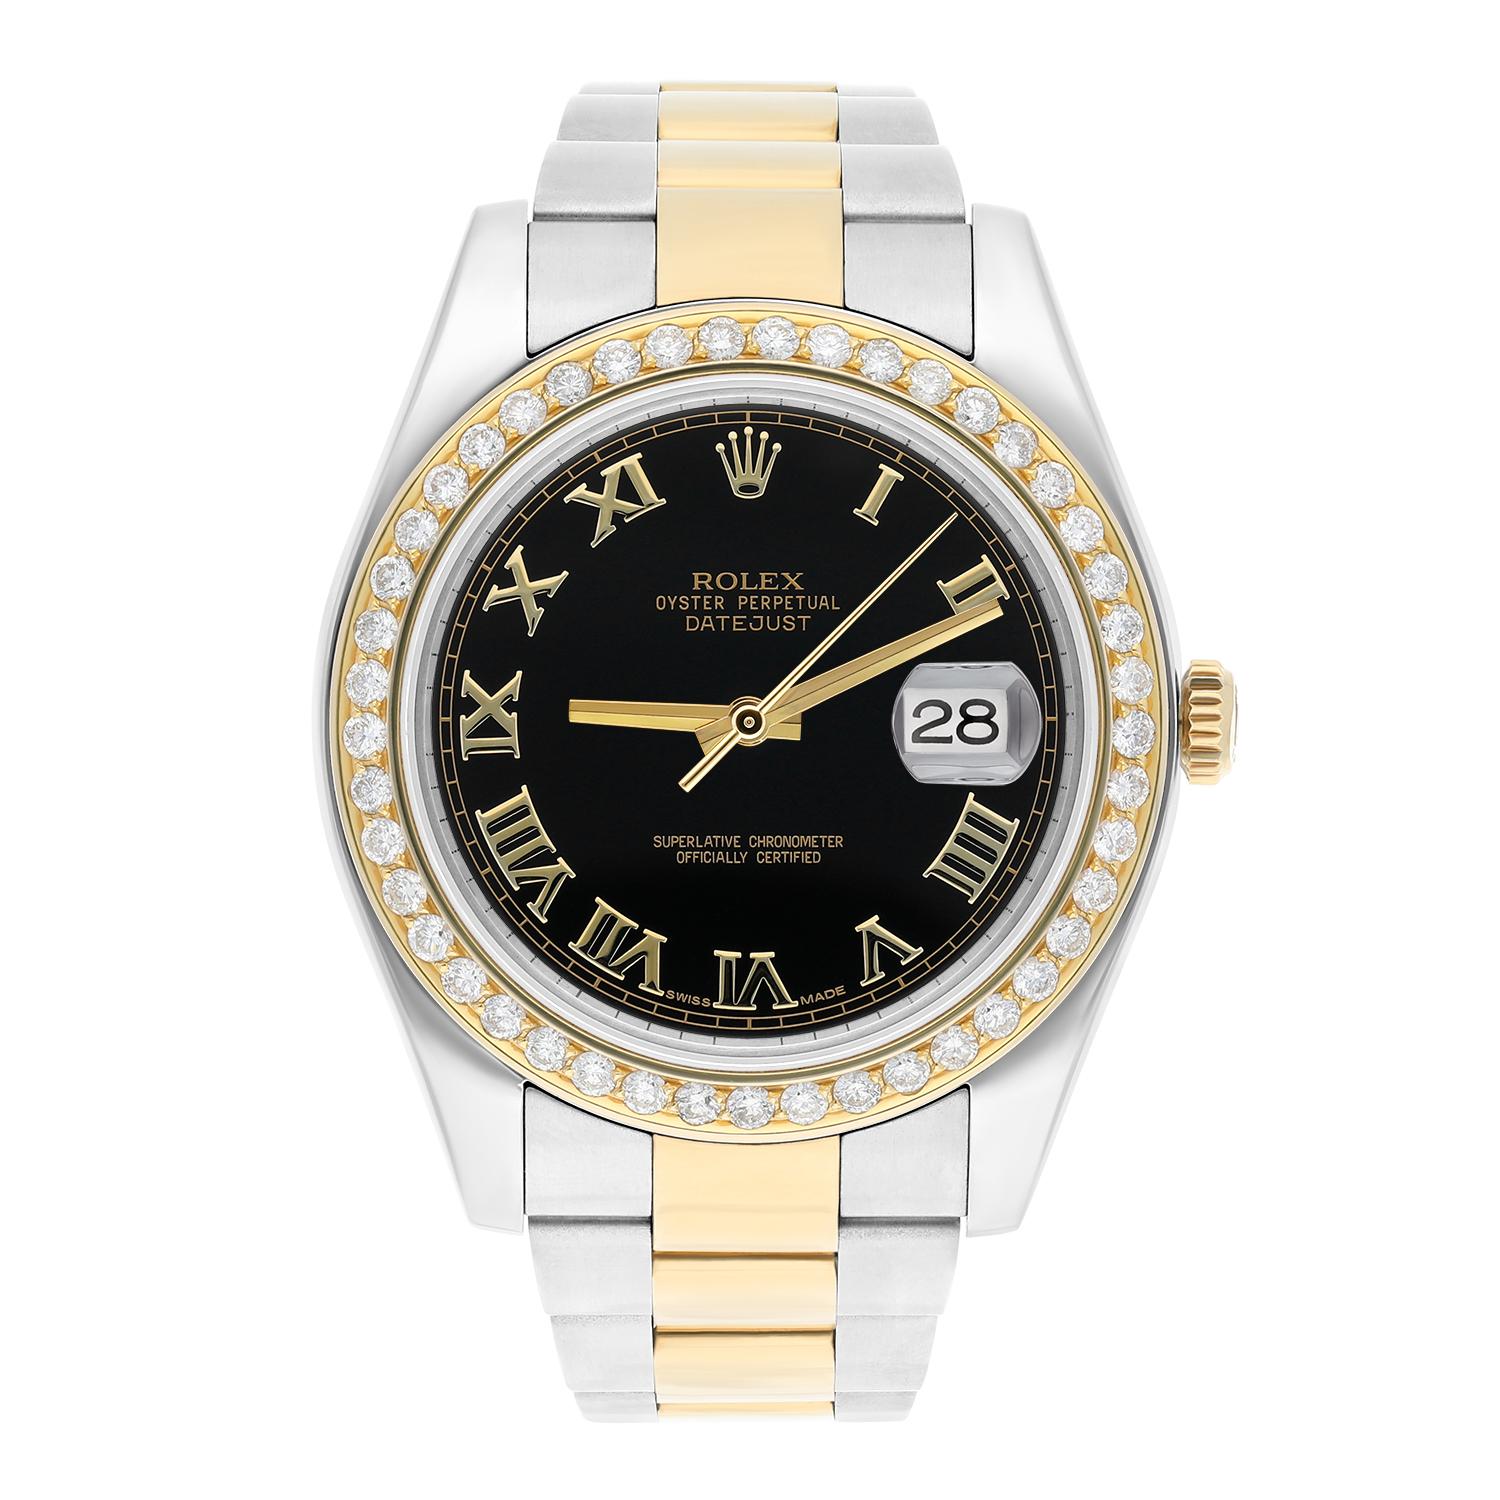 Brand: Rolex
Series: Datejust
Model: 116333
Case Diameter: 41 mm
Bracelet: Oyster band; stainless steel and 18K Yellow Gold
Bezel: Custom Diamond Set, 18K Gold Plated
Dial: Black dial
The sale includes a jewelry watch box and an appraisal